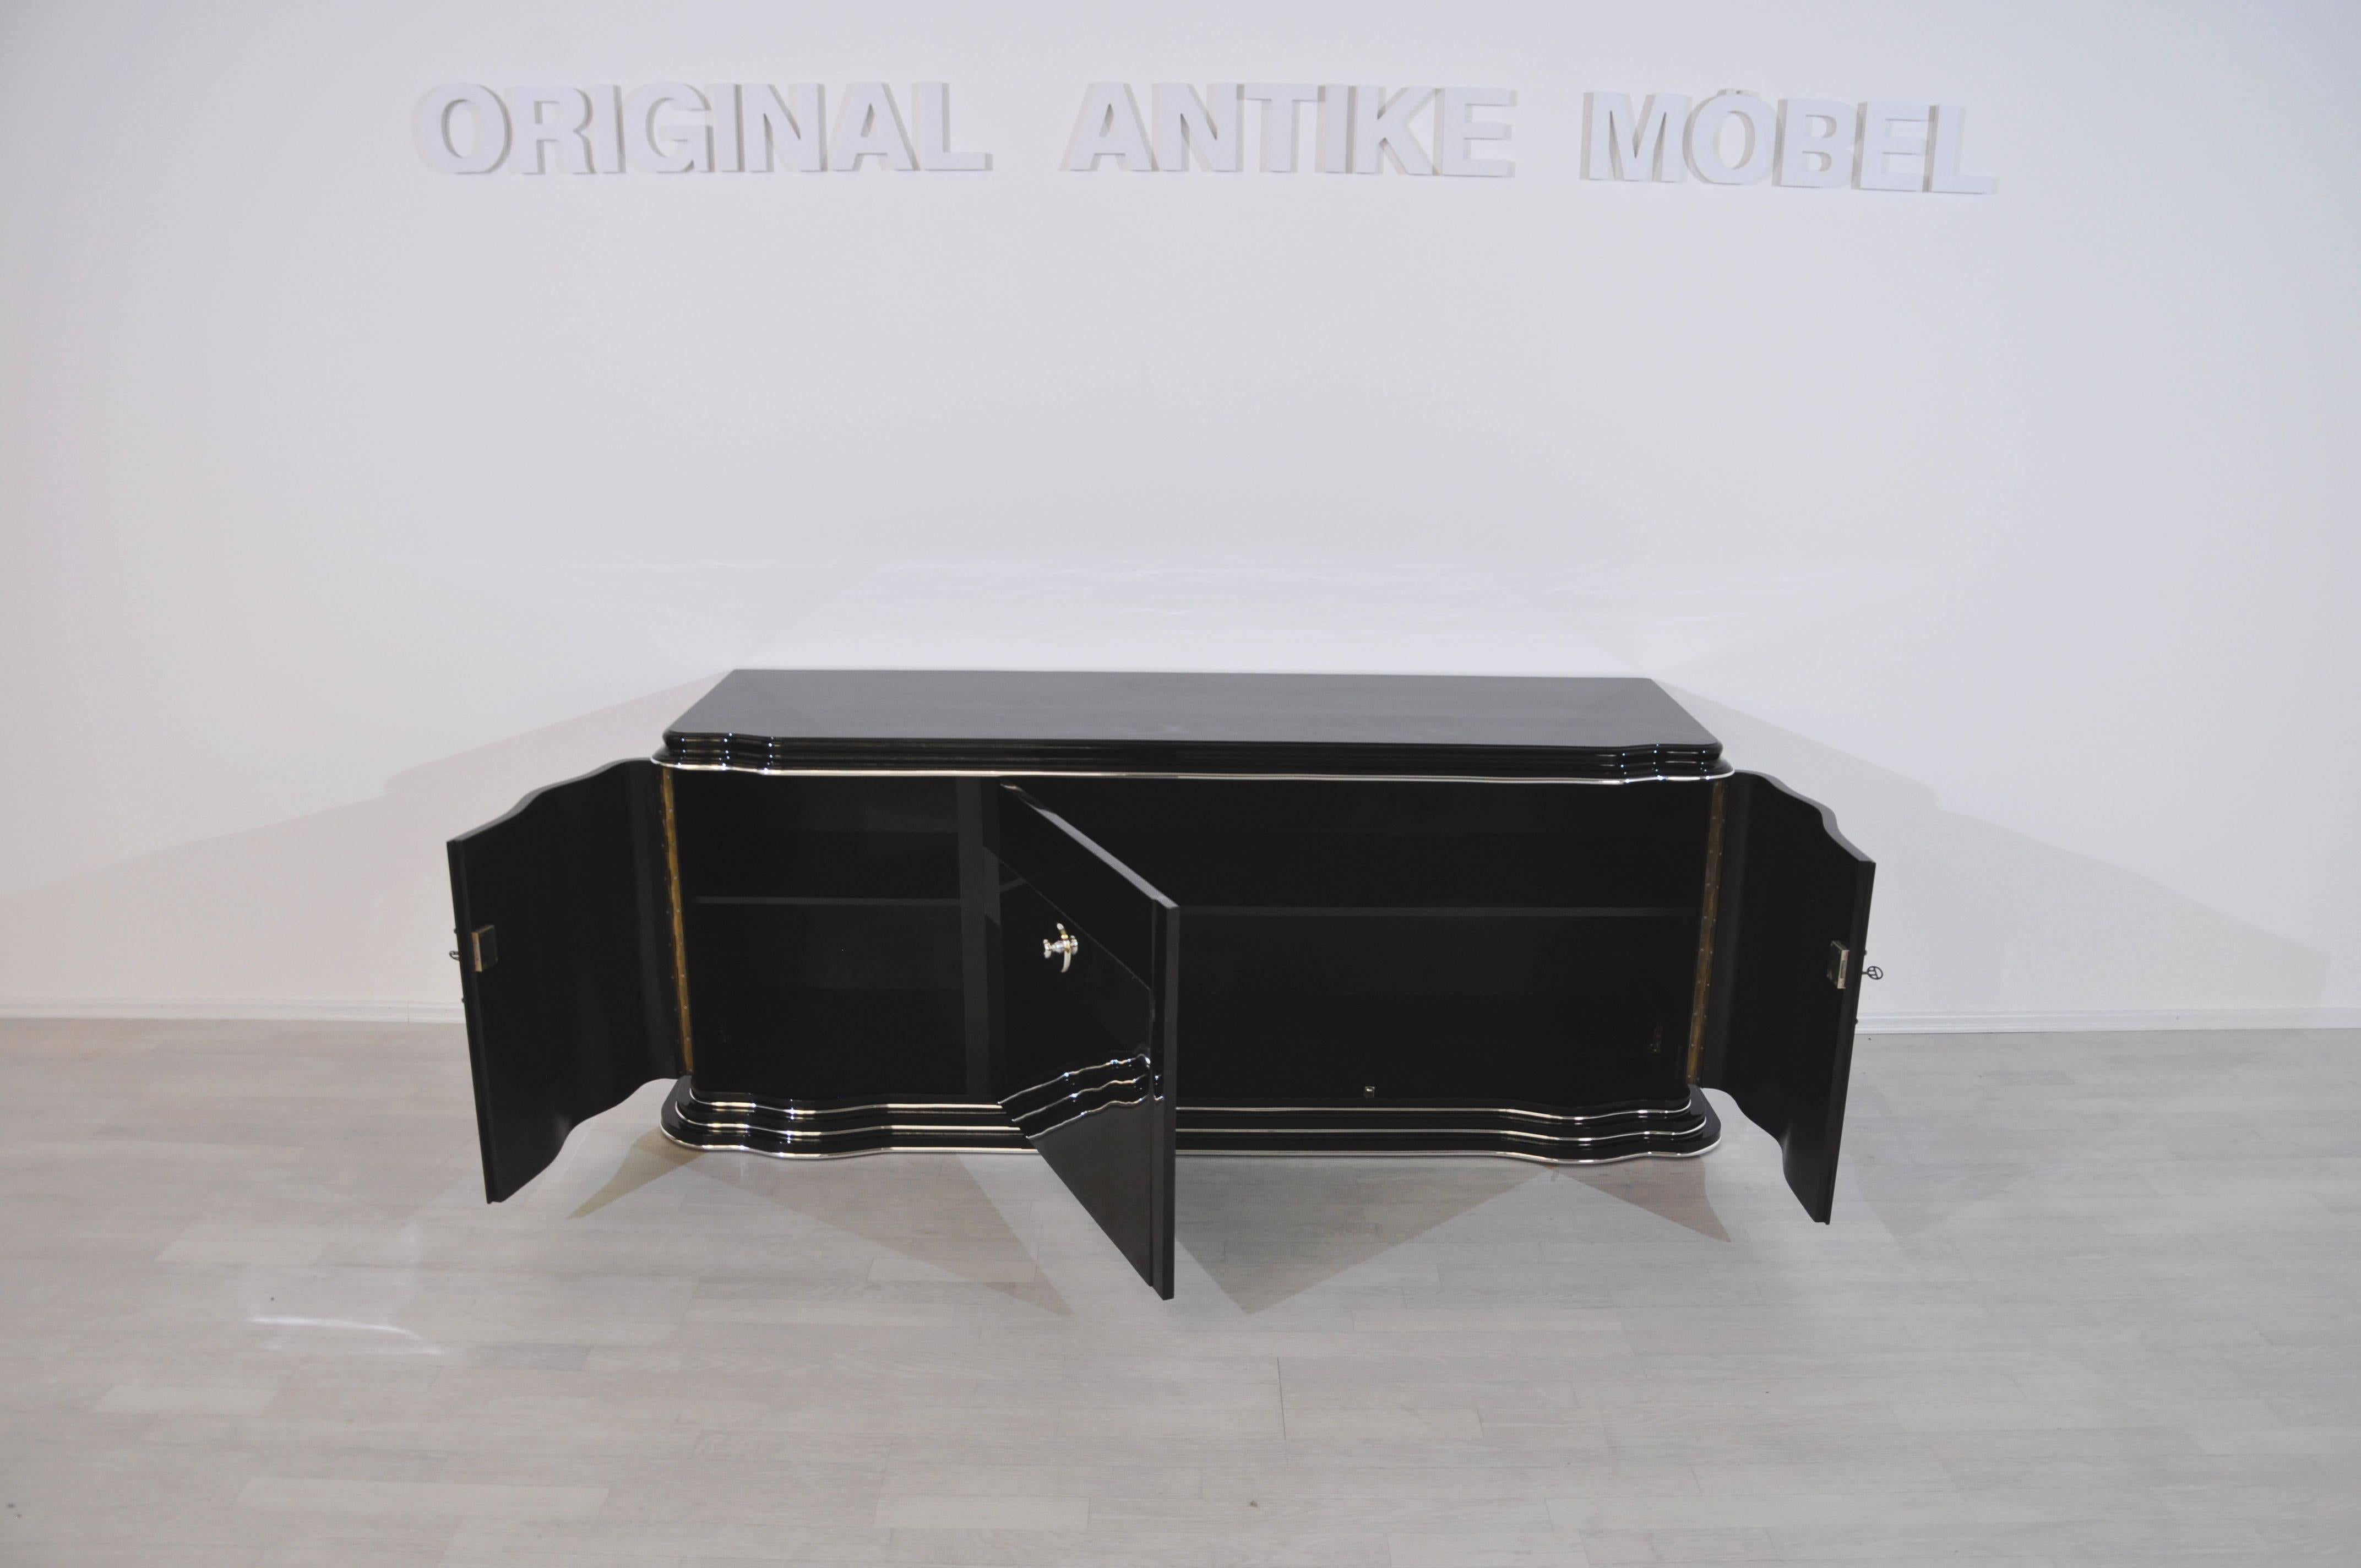 Wonderful Art Deco style lowboard or sideboard finished in high gloss black. With a unique mirror stripe and fine chrome details. The original was sold to Sweden, while this perfect rebuild is now for sale. Unmatched quality without any flaws.